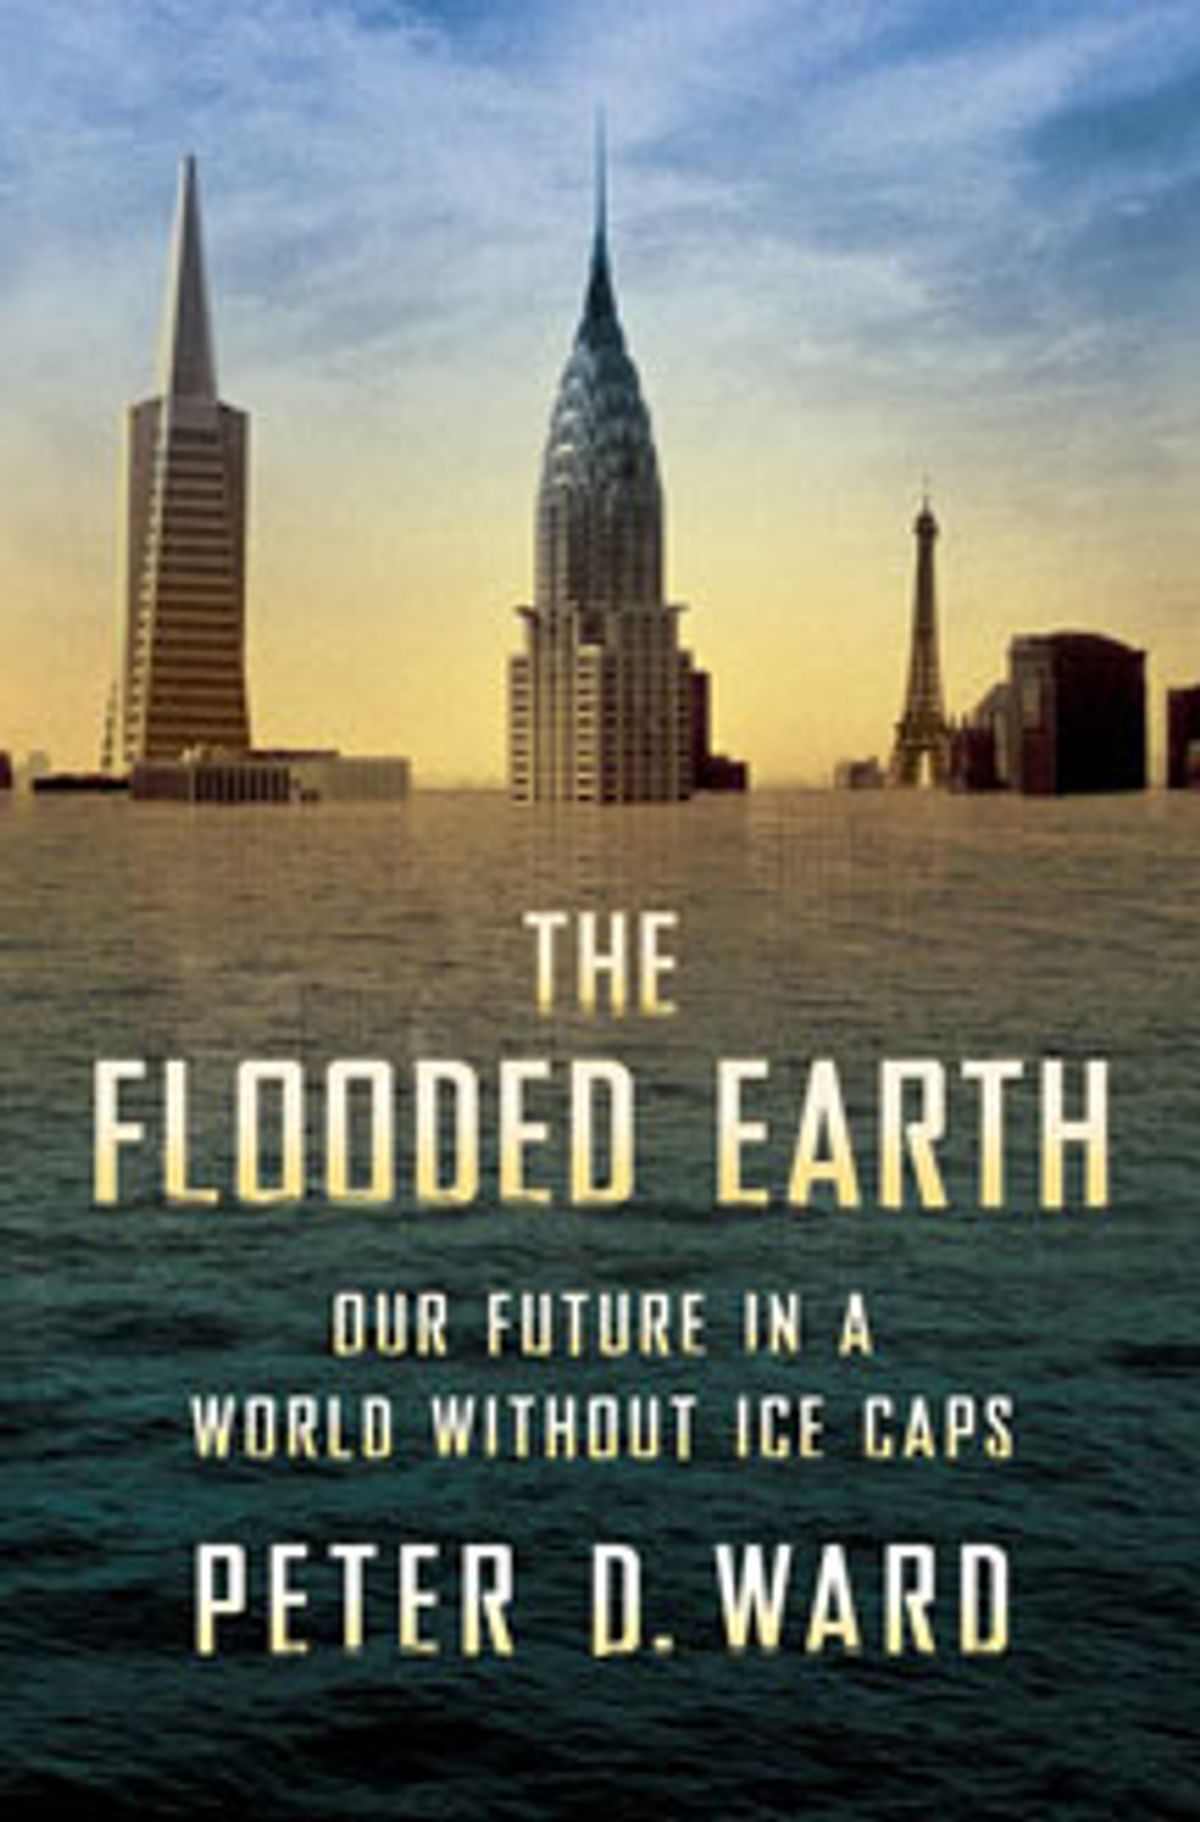 Book Review: The Flooded Earth: Our Future in a World Without Ice Caps